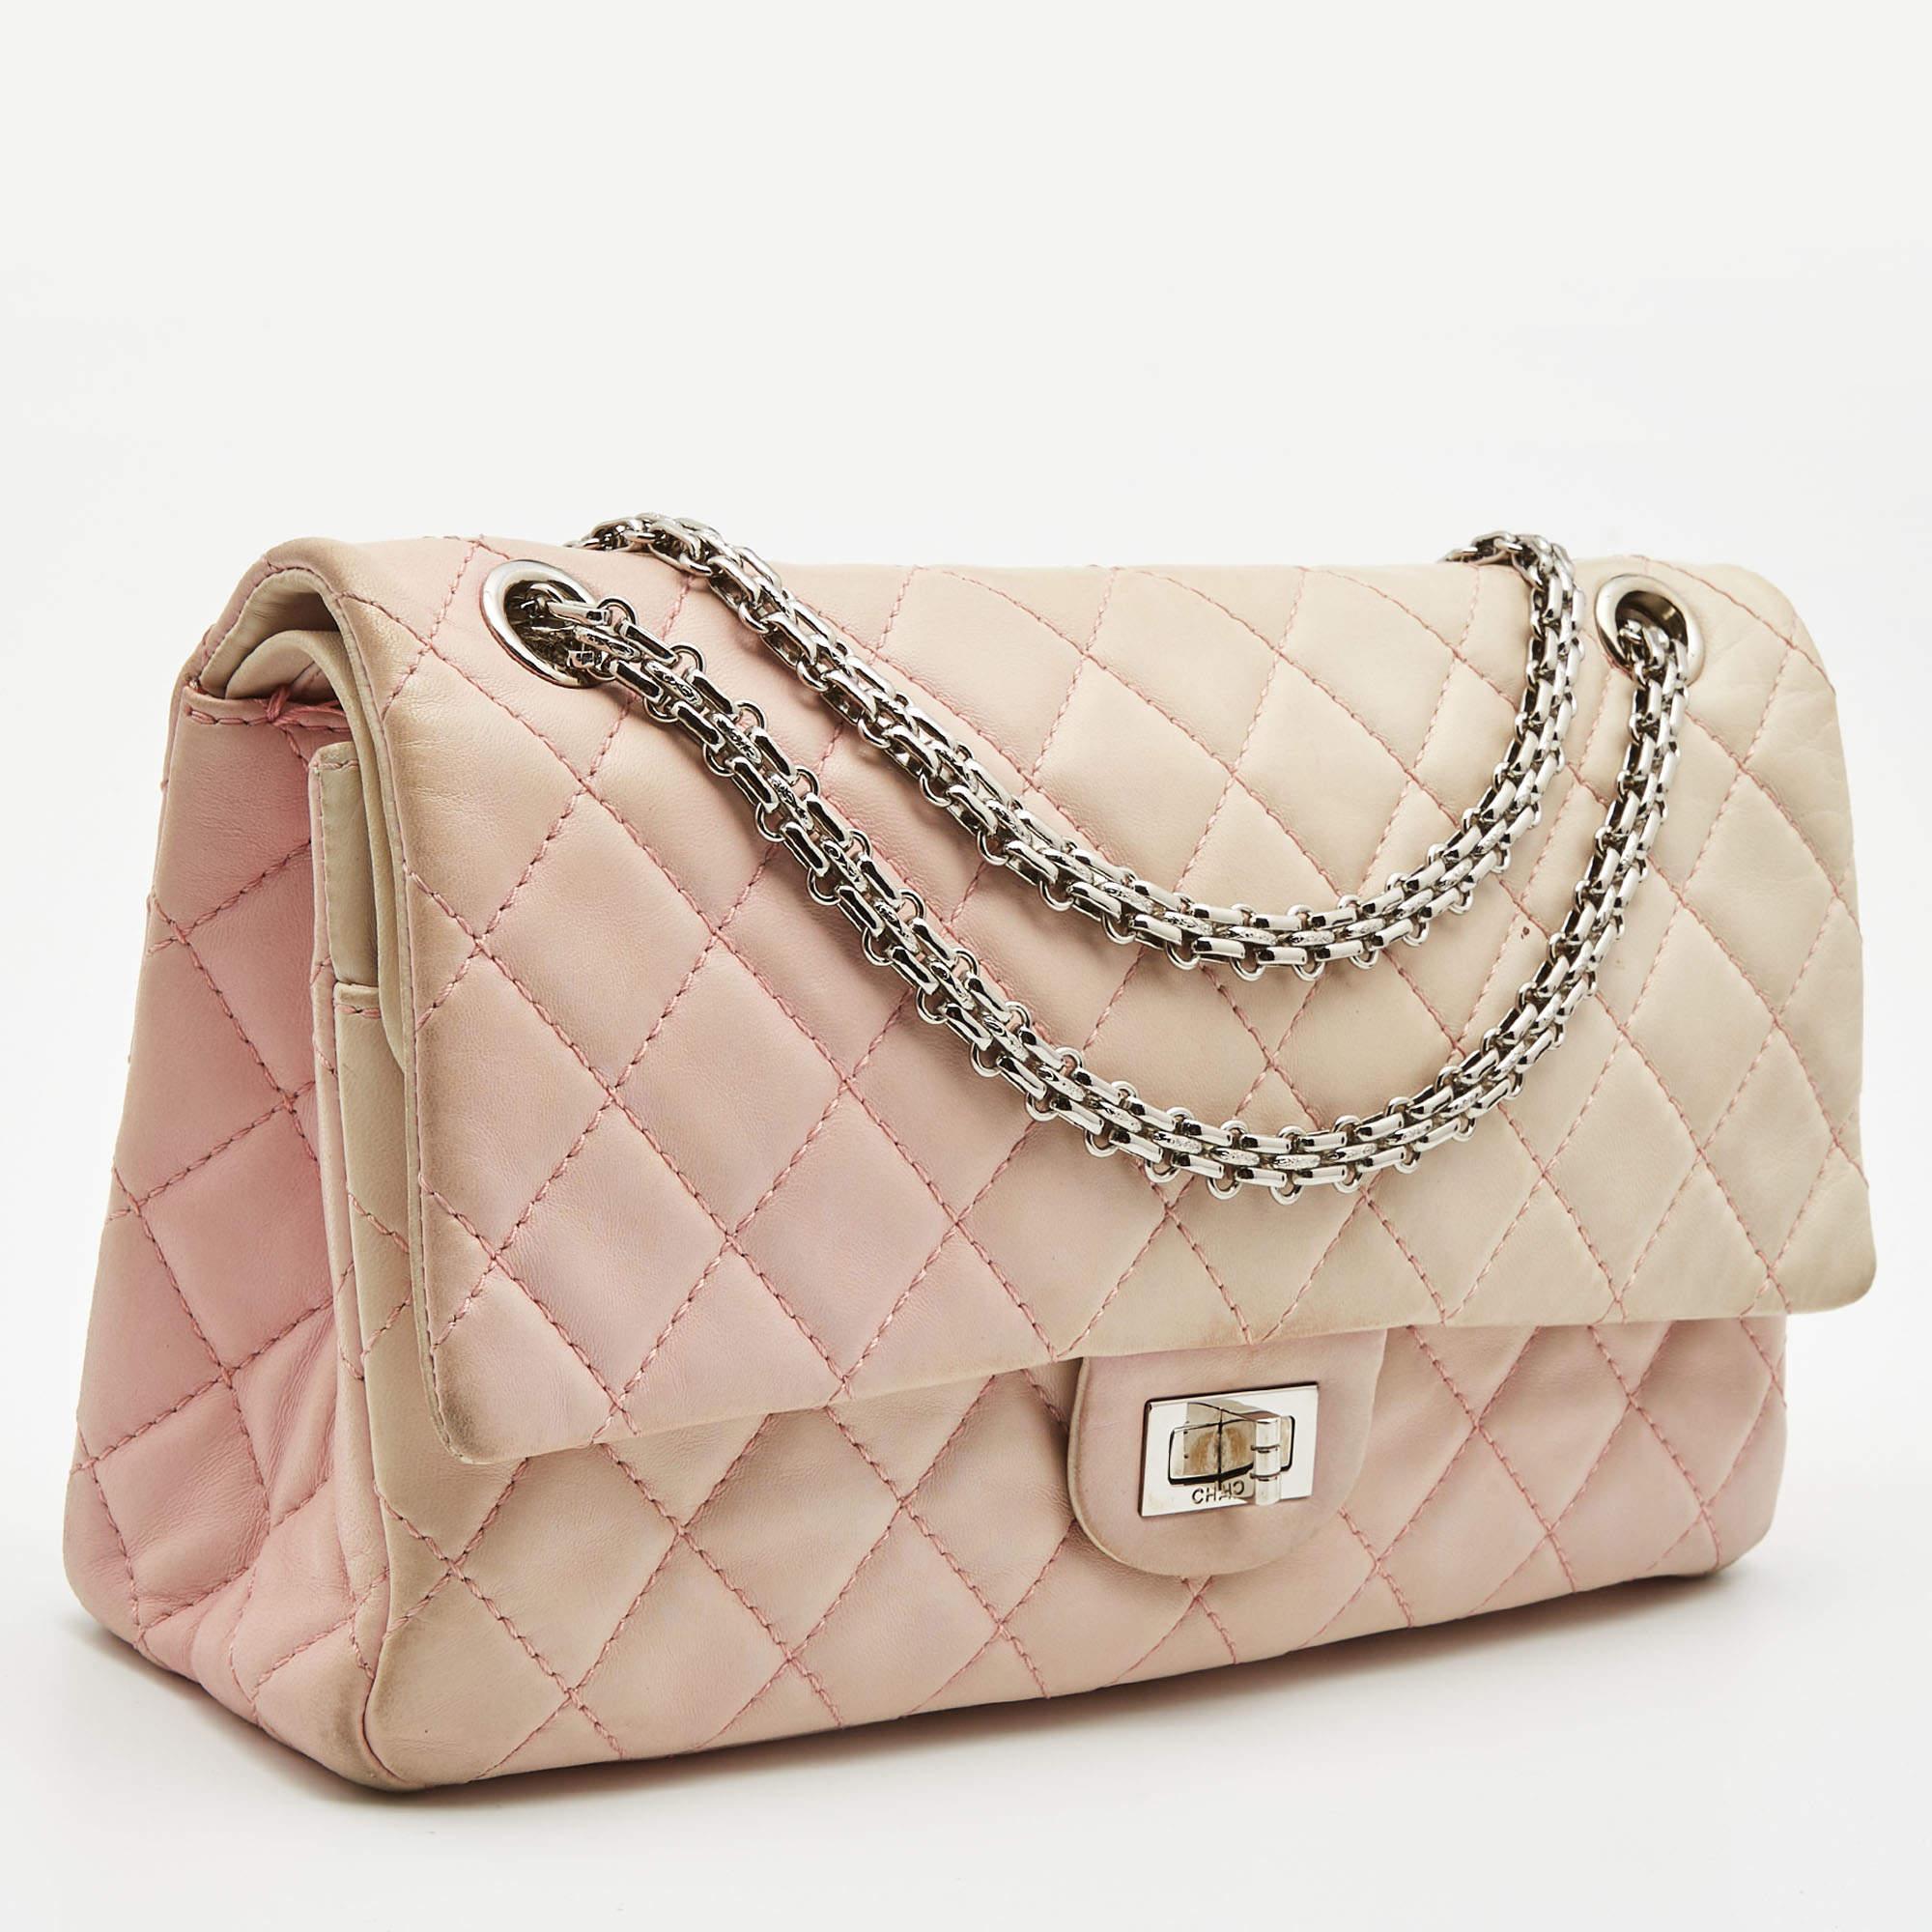 Chanel Pink Ombre Quilted Leather Reissue 2.55 Classic 226 Flap Bag In Good Condition For Sale In Dubai, Al Qouz 2